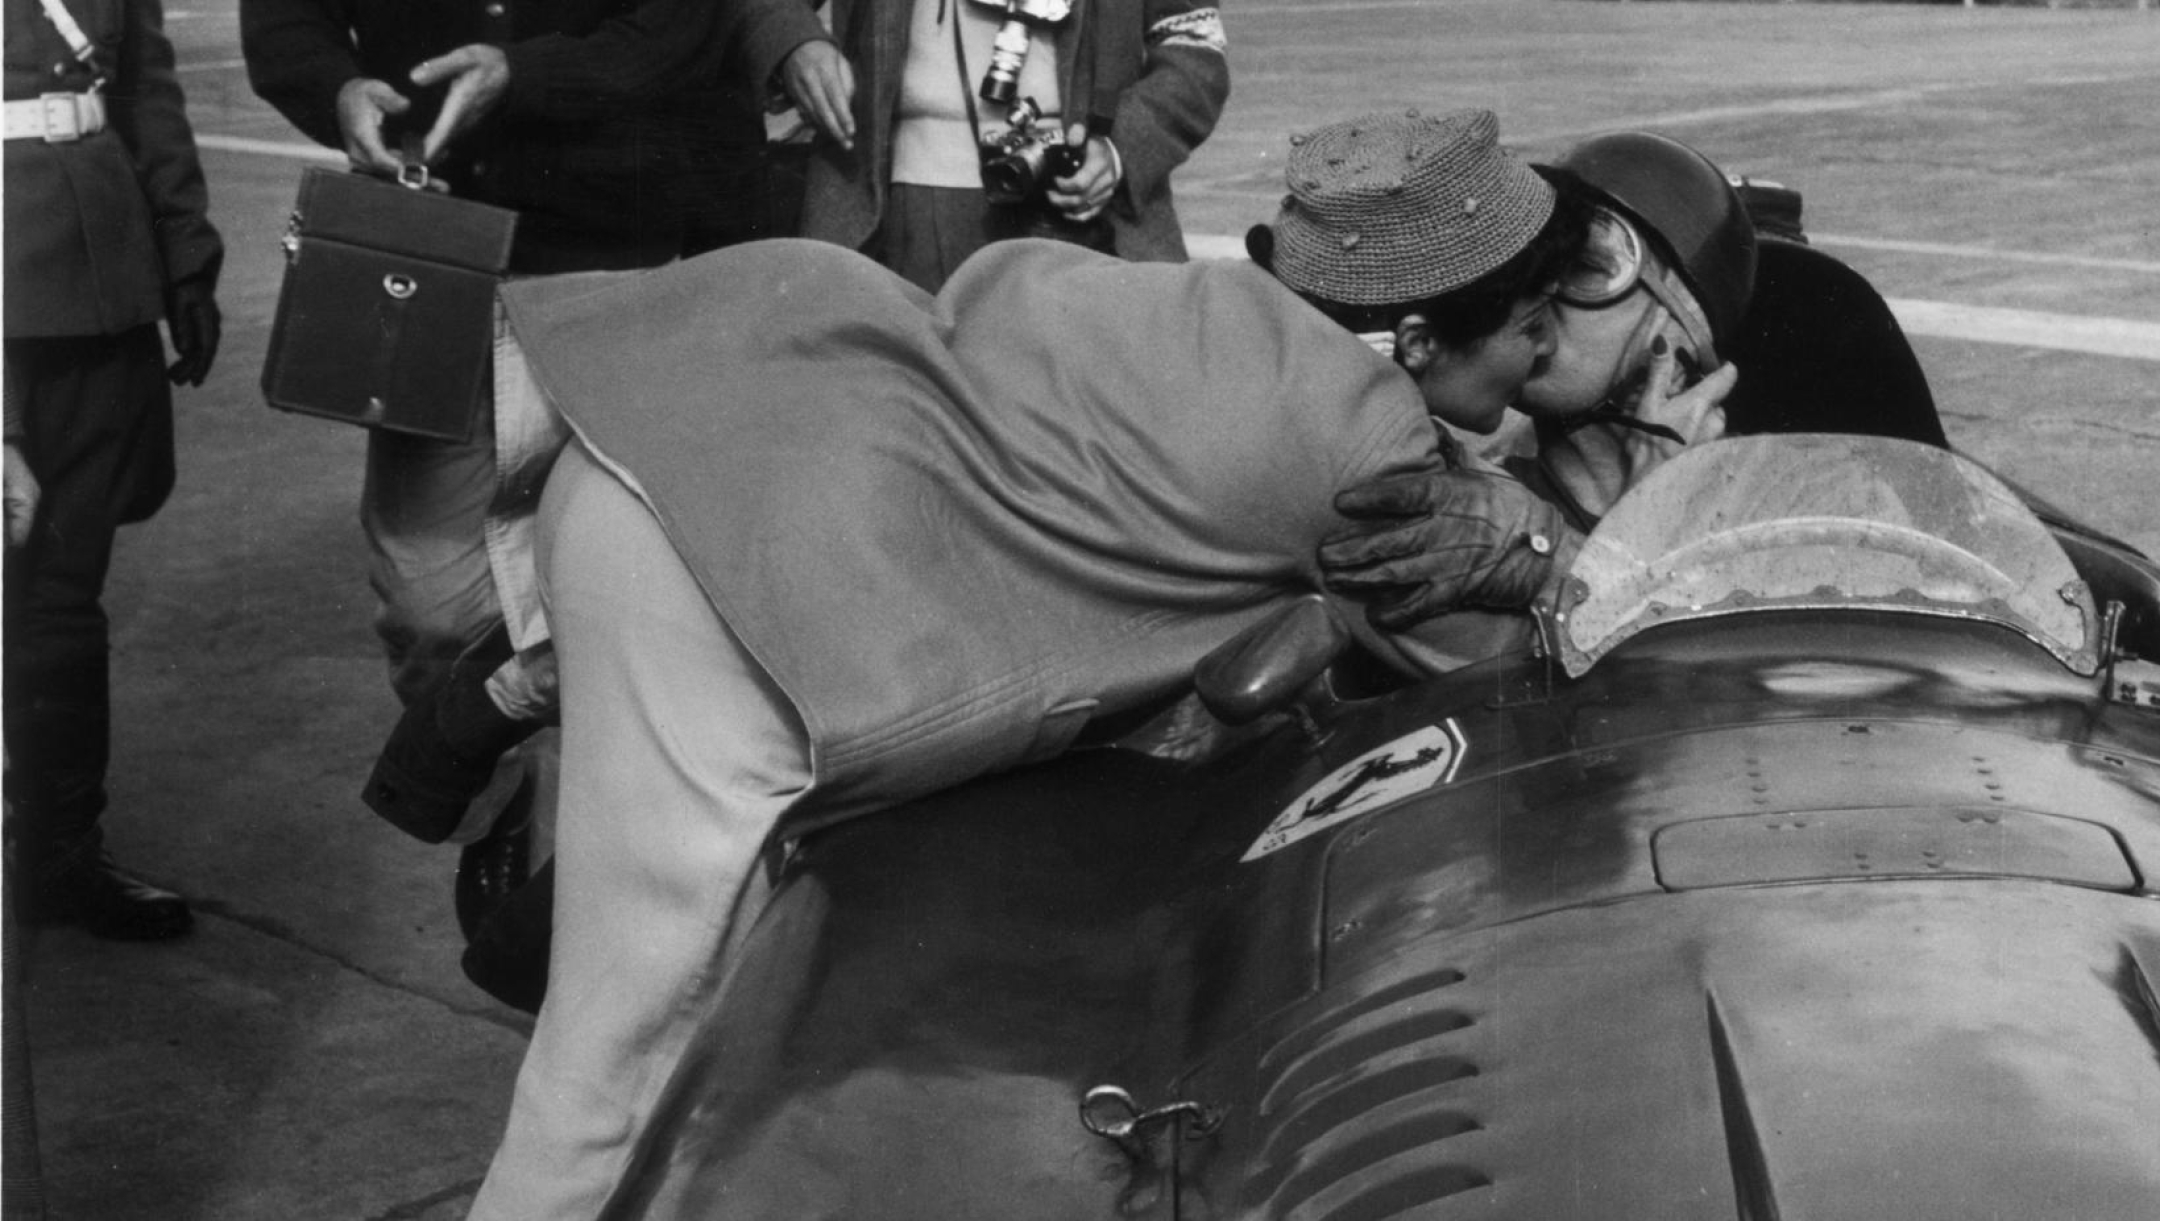 1956:  Juan Fangio of Argentina receives a kiss from his partner Andrea after winning the Geman Grand Prix in a Ferrari at the Nurburgring track.  (Photo by Keystone/Getty Images)